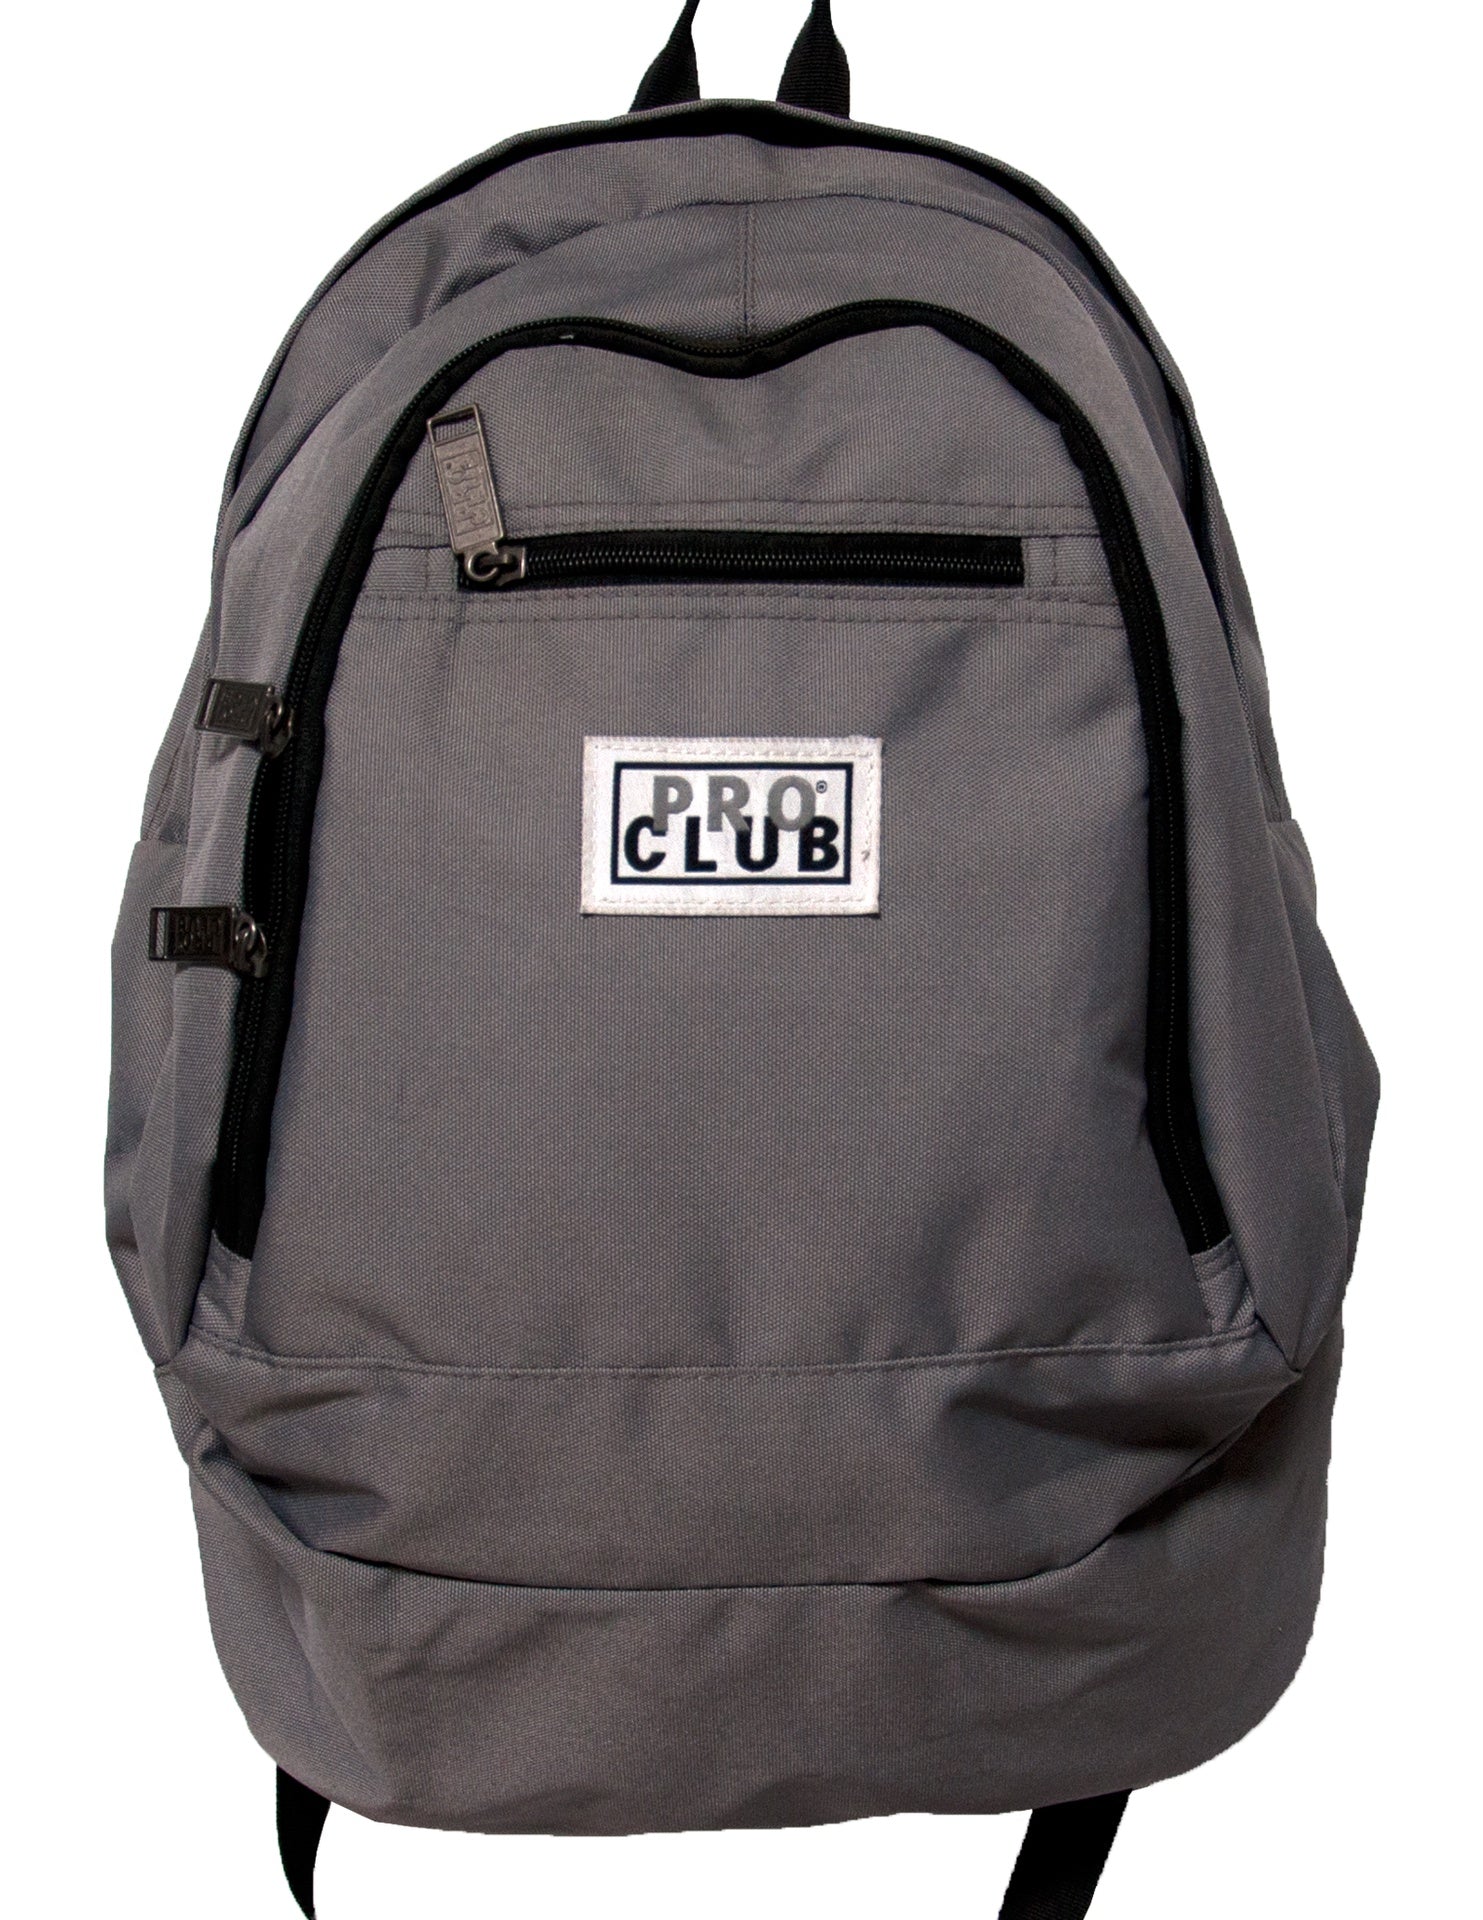 Pro Club Backpack - Gray